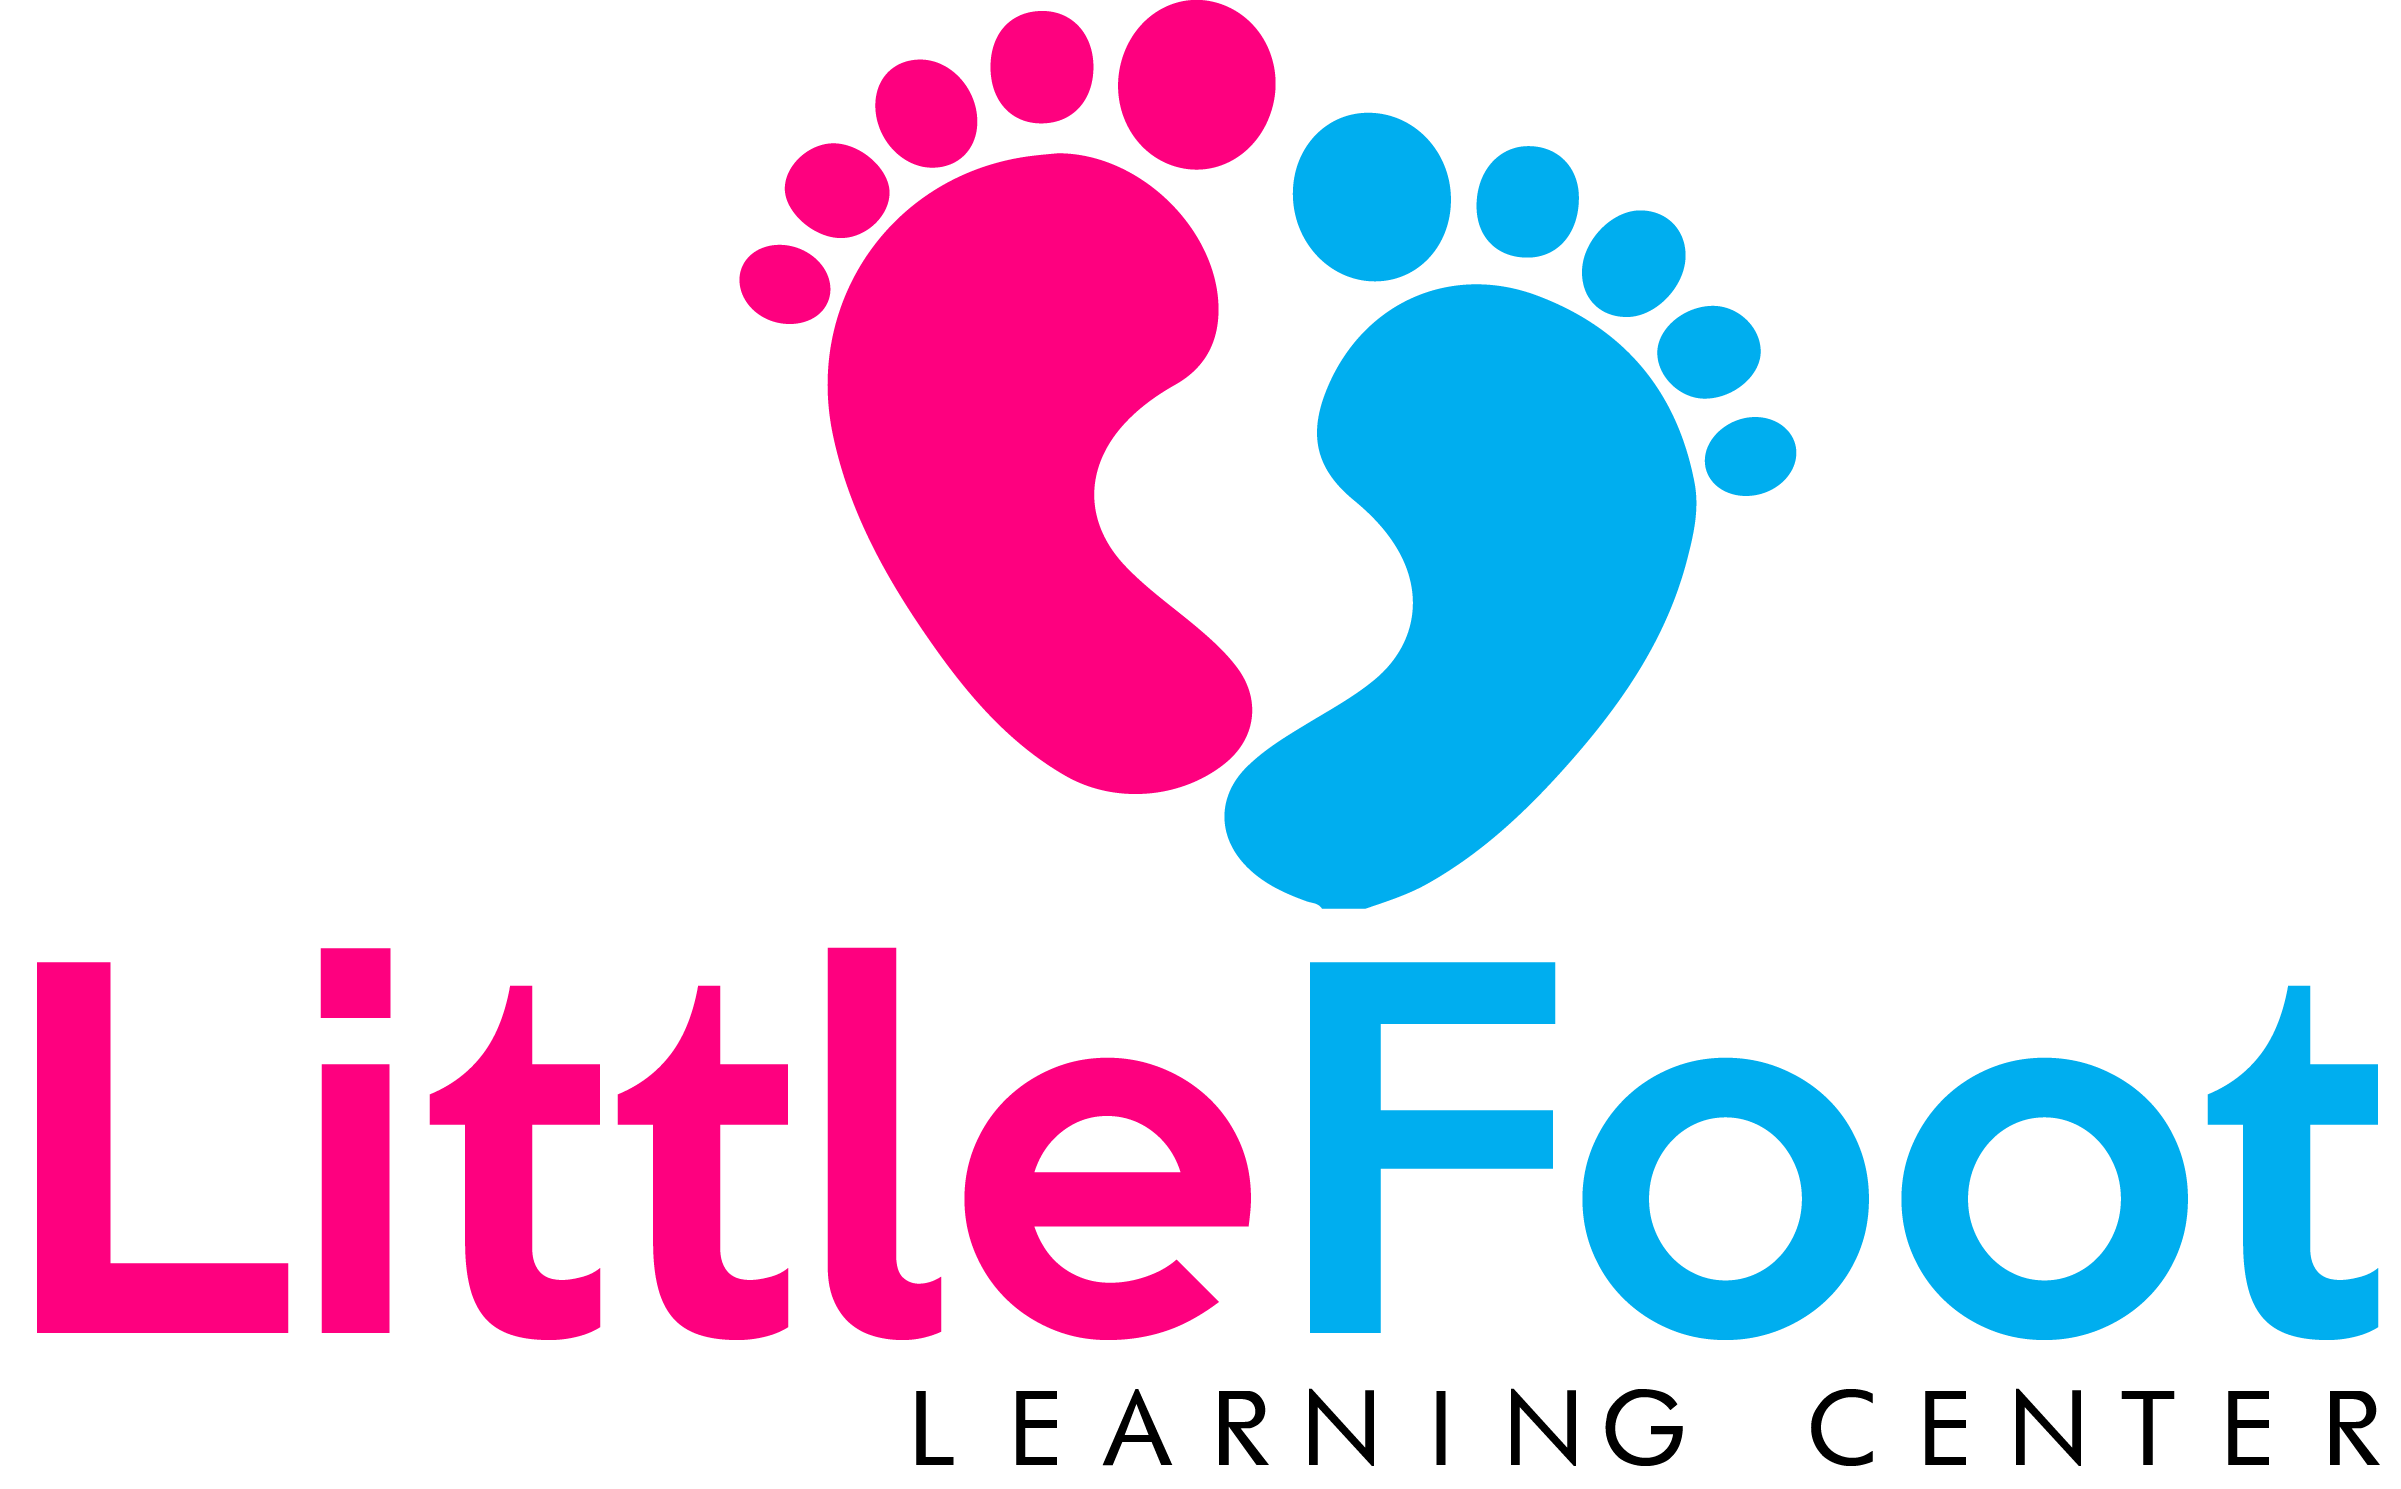 footsteps clipart little foot